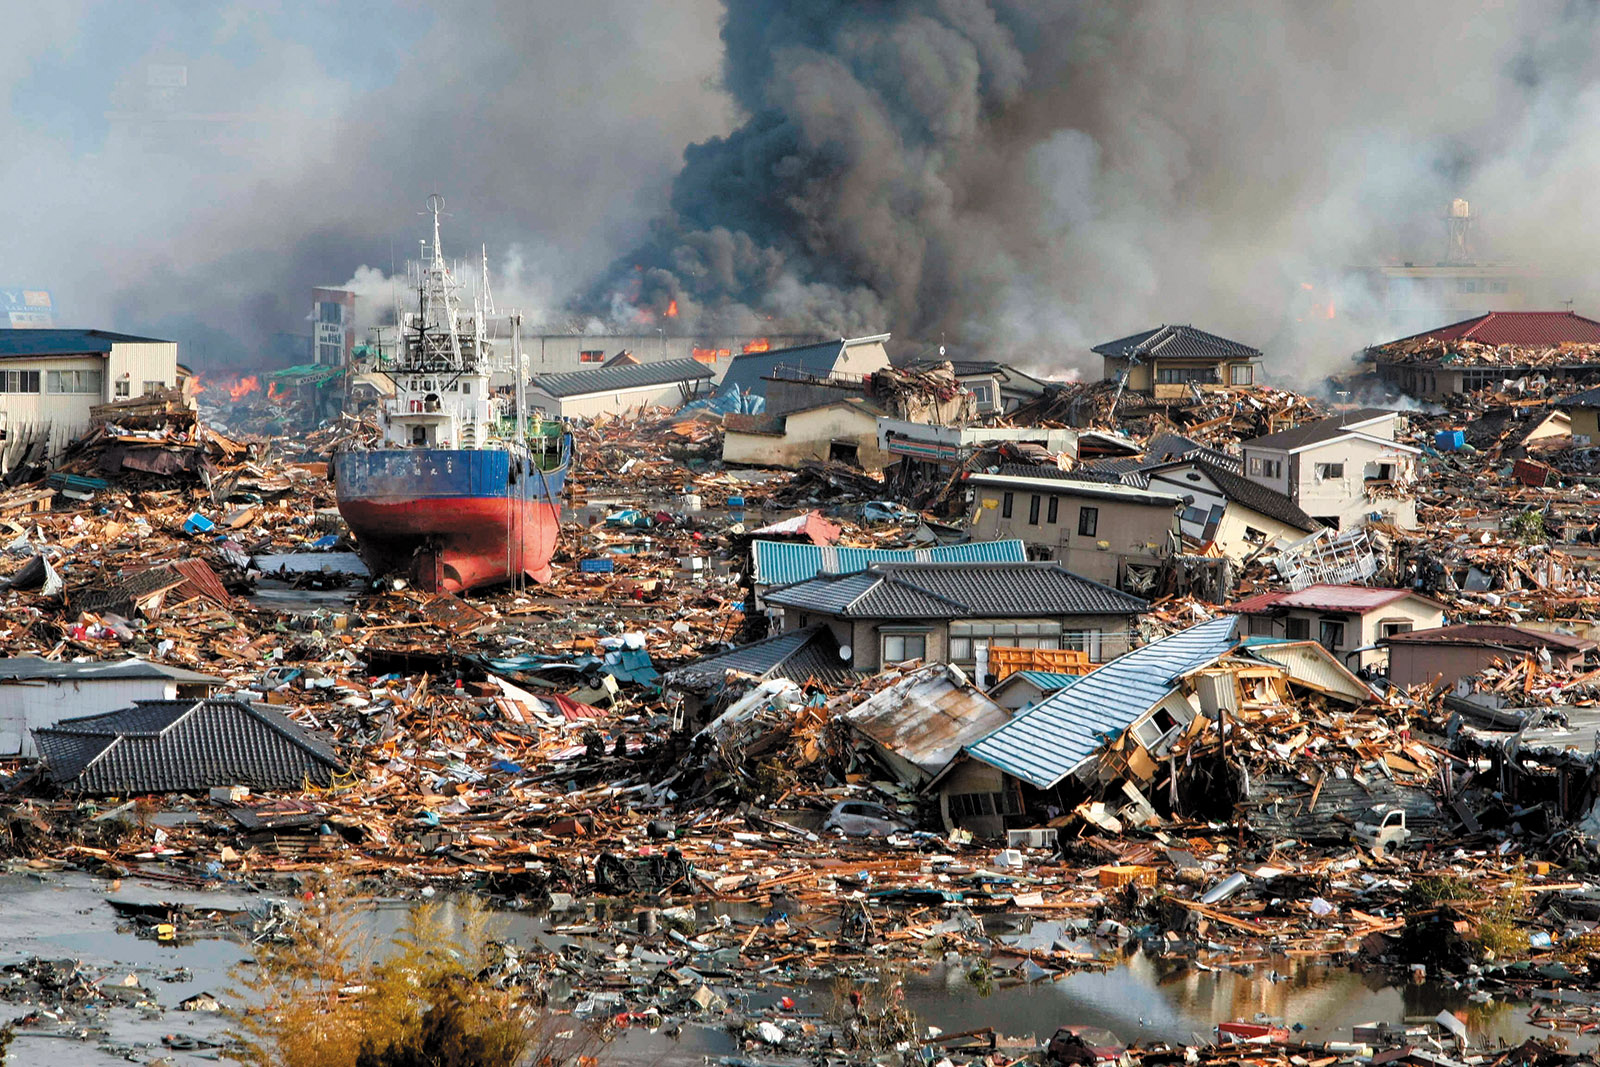 A destroyed section of the Japanese coastal city of Kesennuma, in Miyagi Prefecture, the day after the Tohoku earthquake and tsunami, March 2011